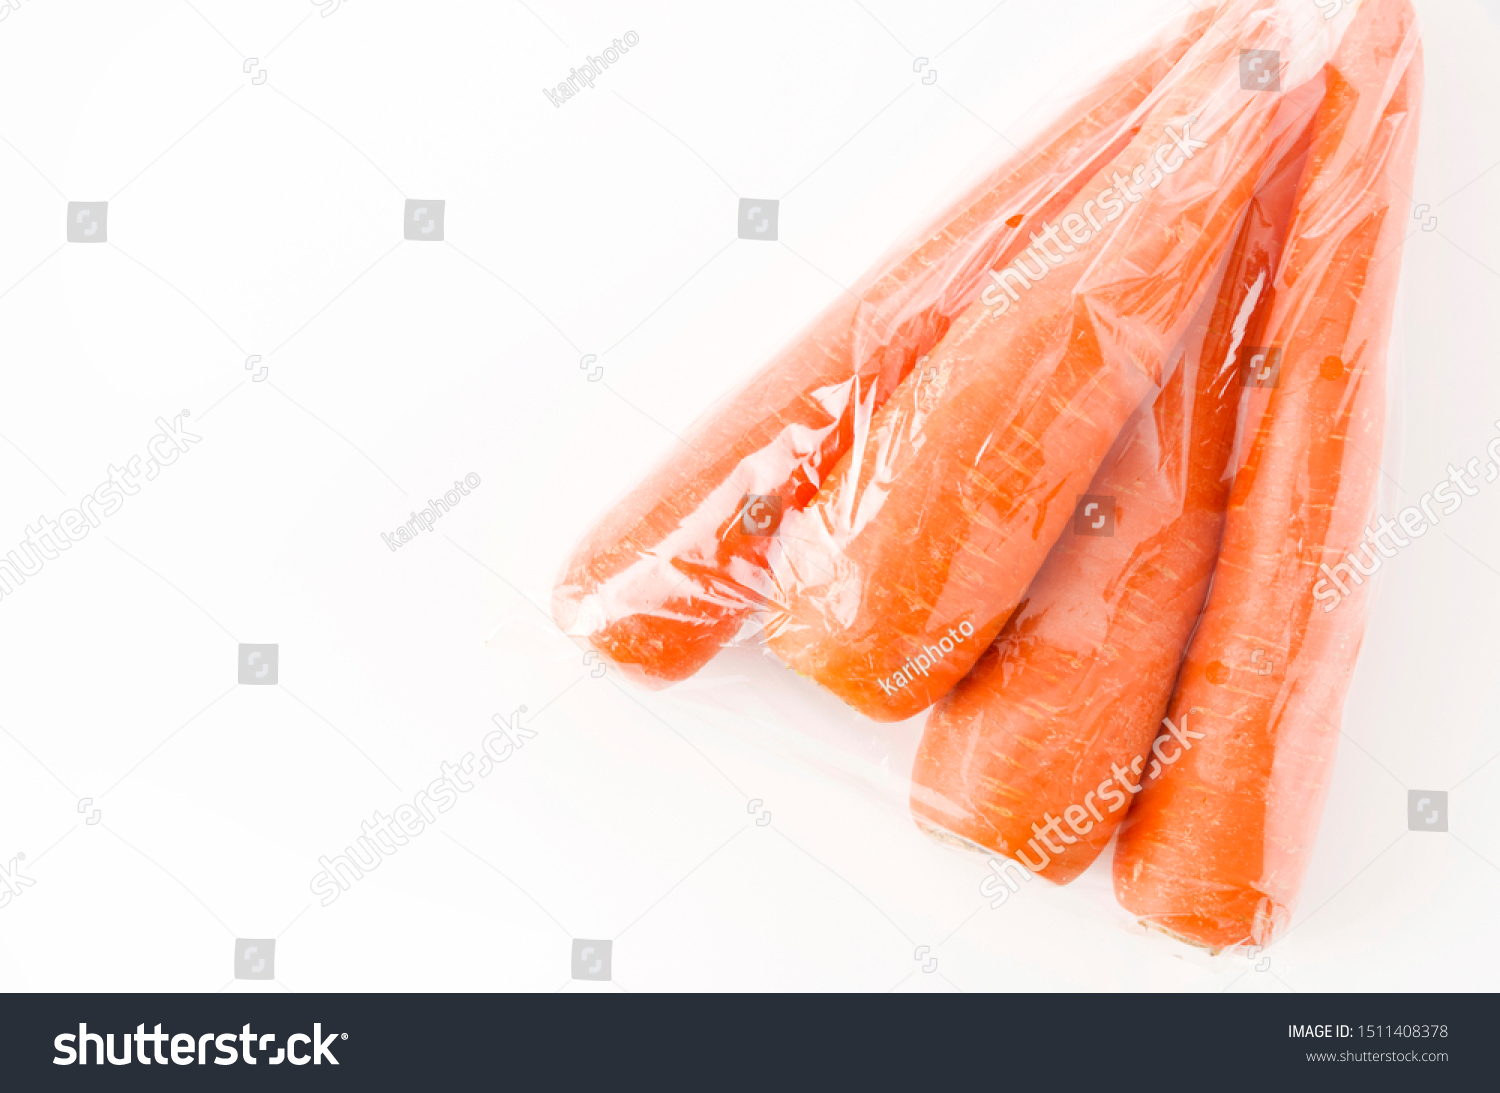 Download Fresh Carrot Plastic Bag On White Stock Photo Edit Now 1511408378 PSD Mockup Templates